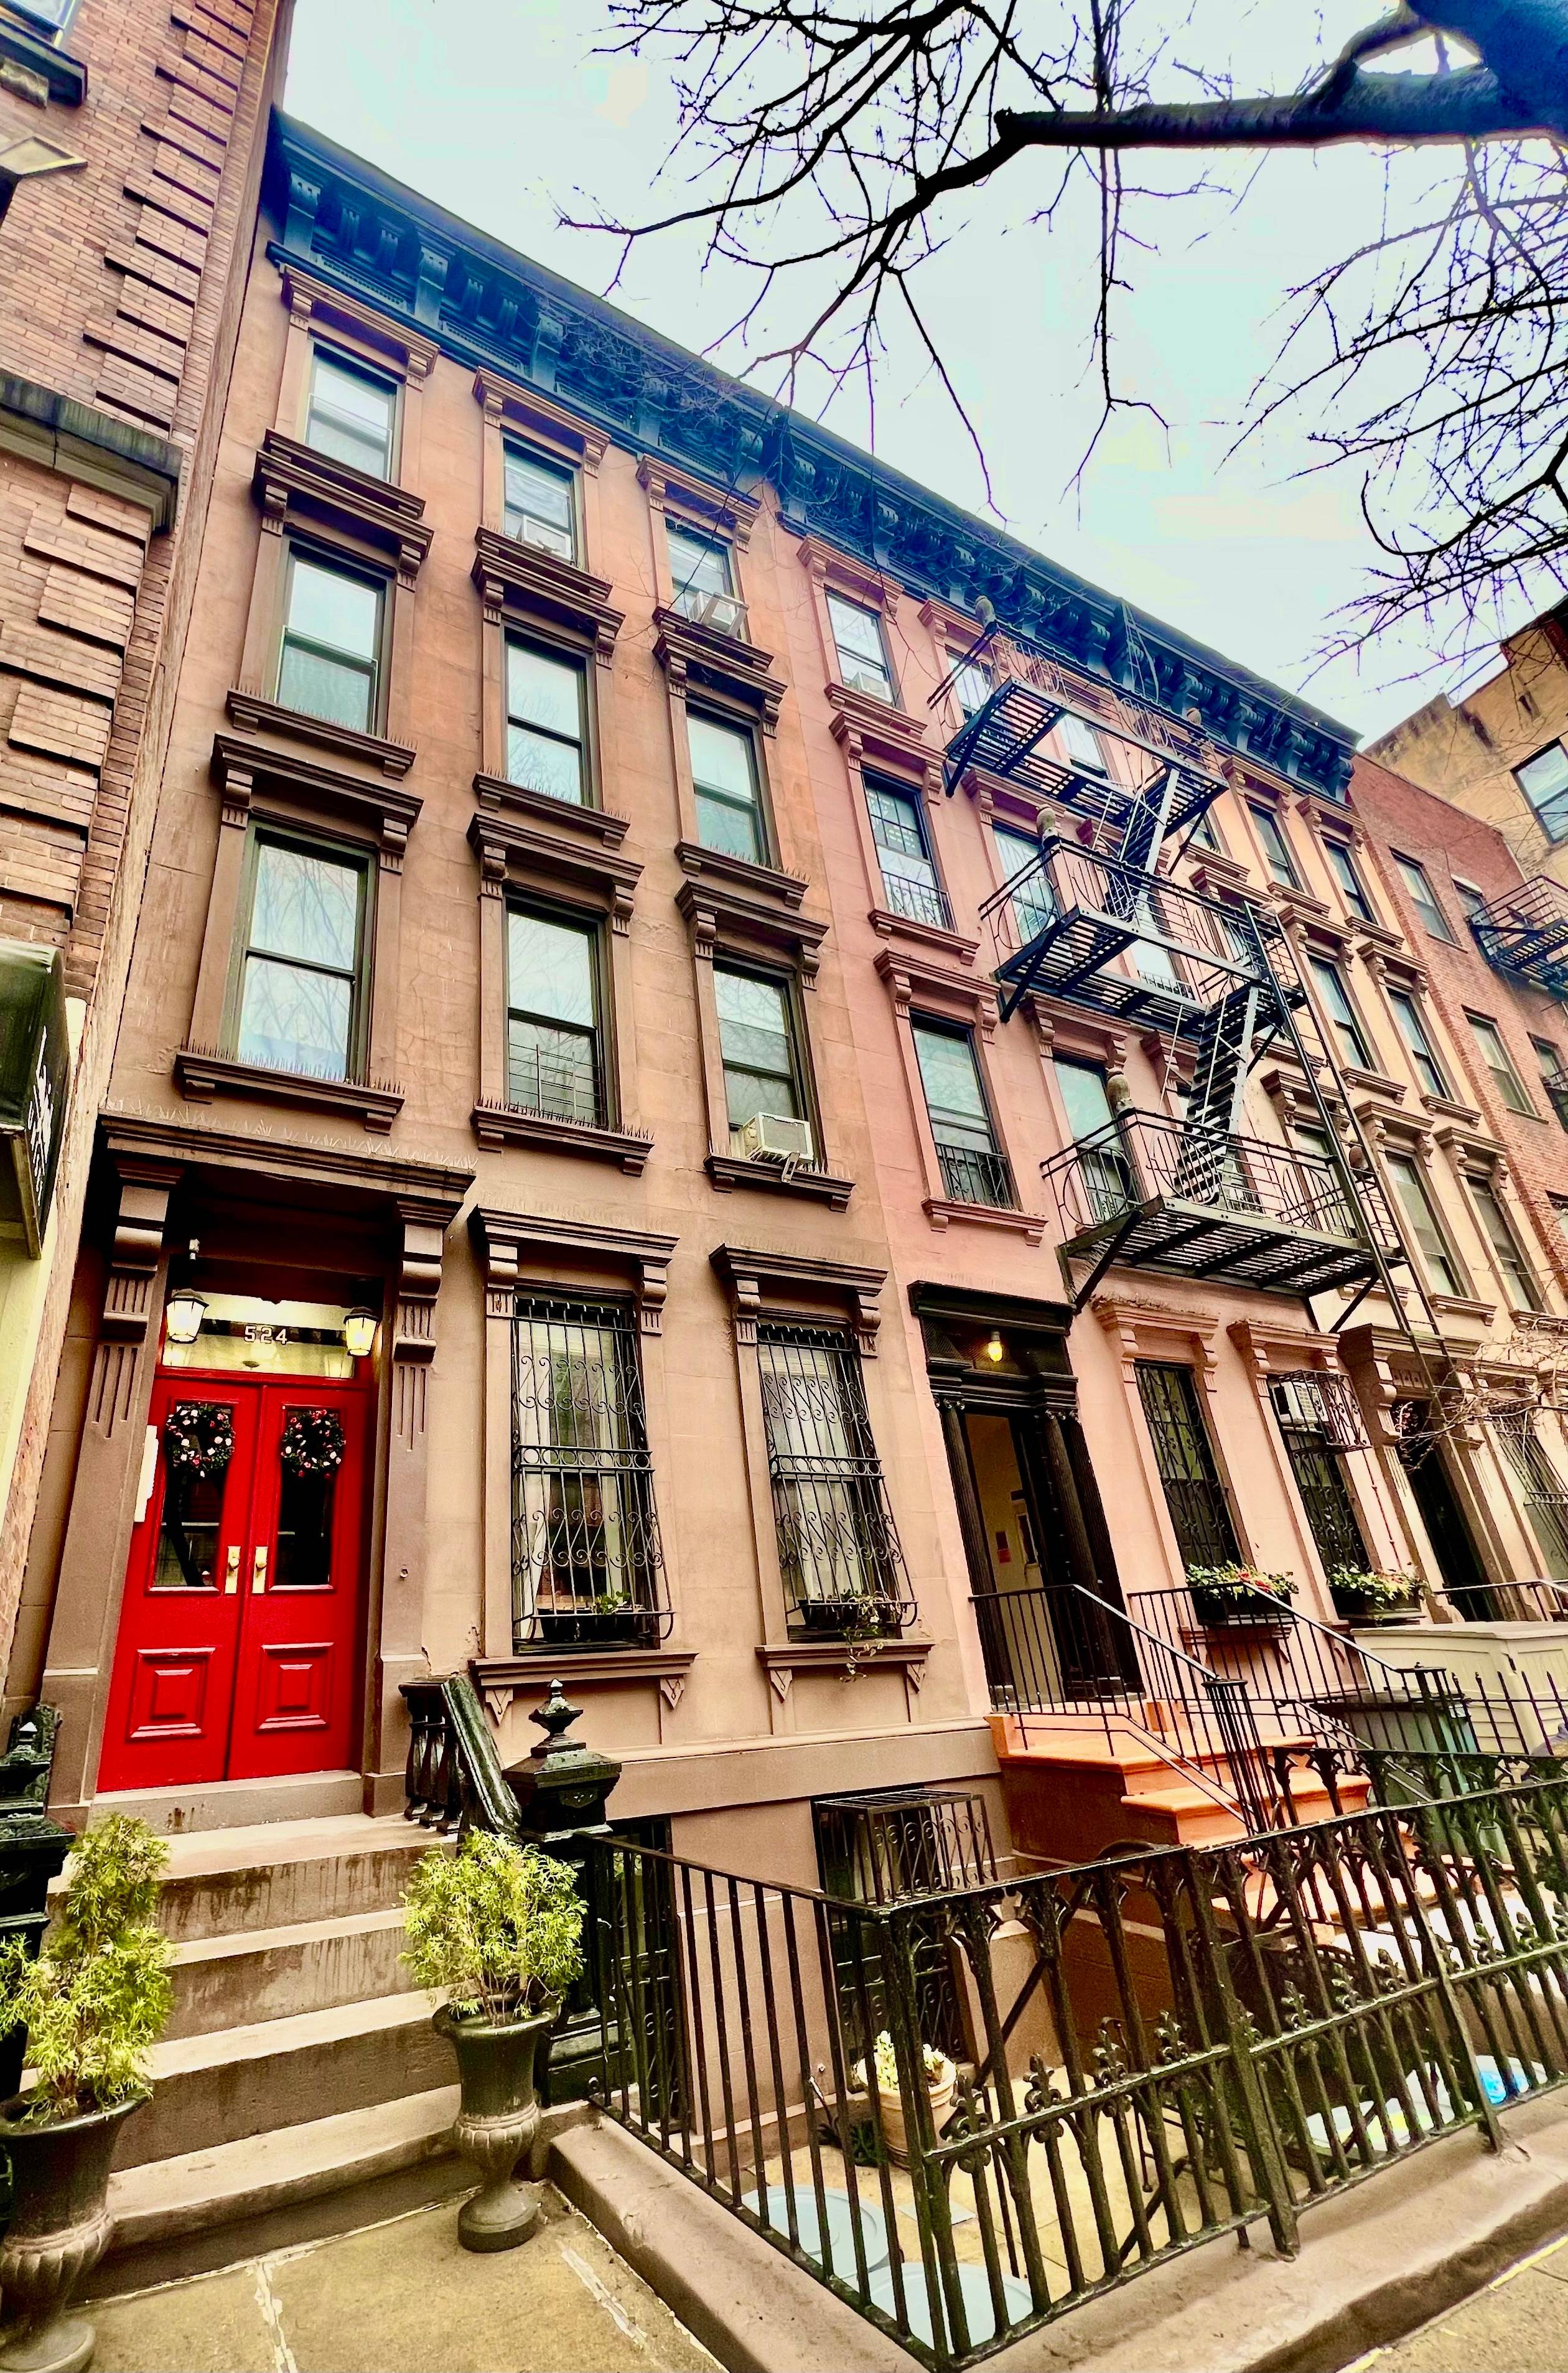 Nestled in a tranquil tree lined enclave on the esteemed Upper East Side, 524 East 82nd Street presents a distinguished four unit brownstone.